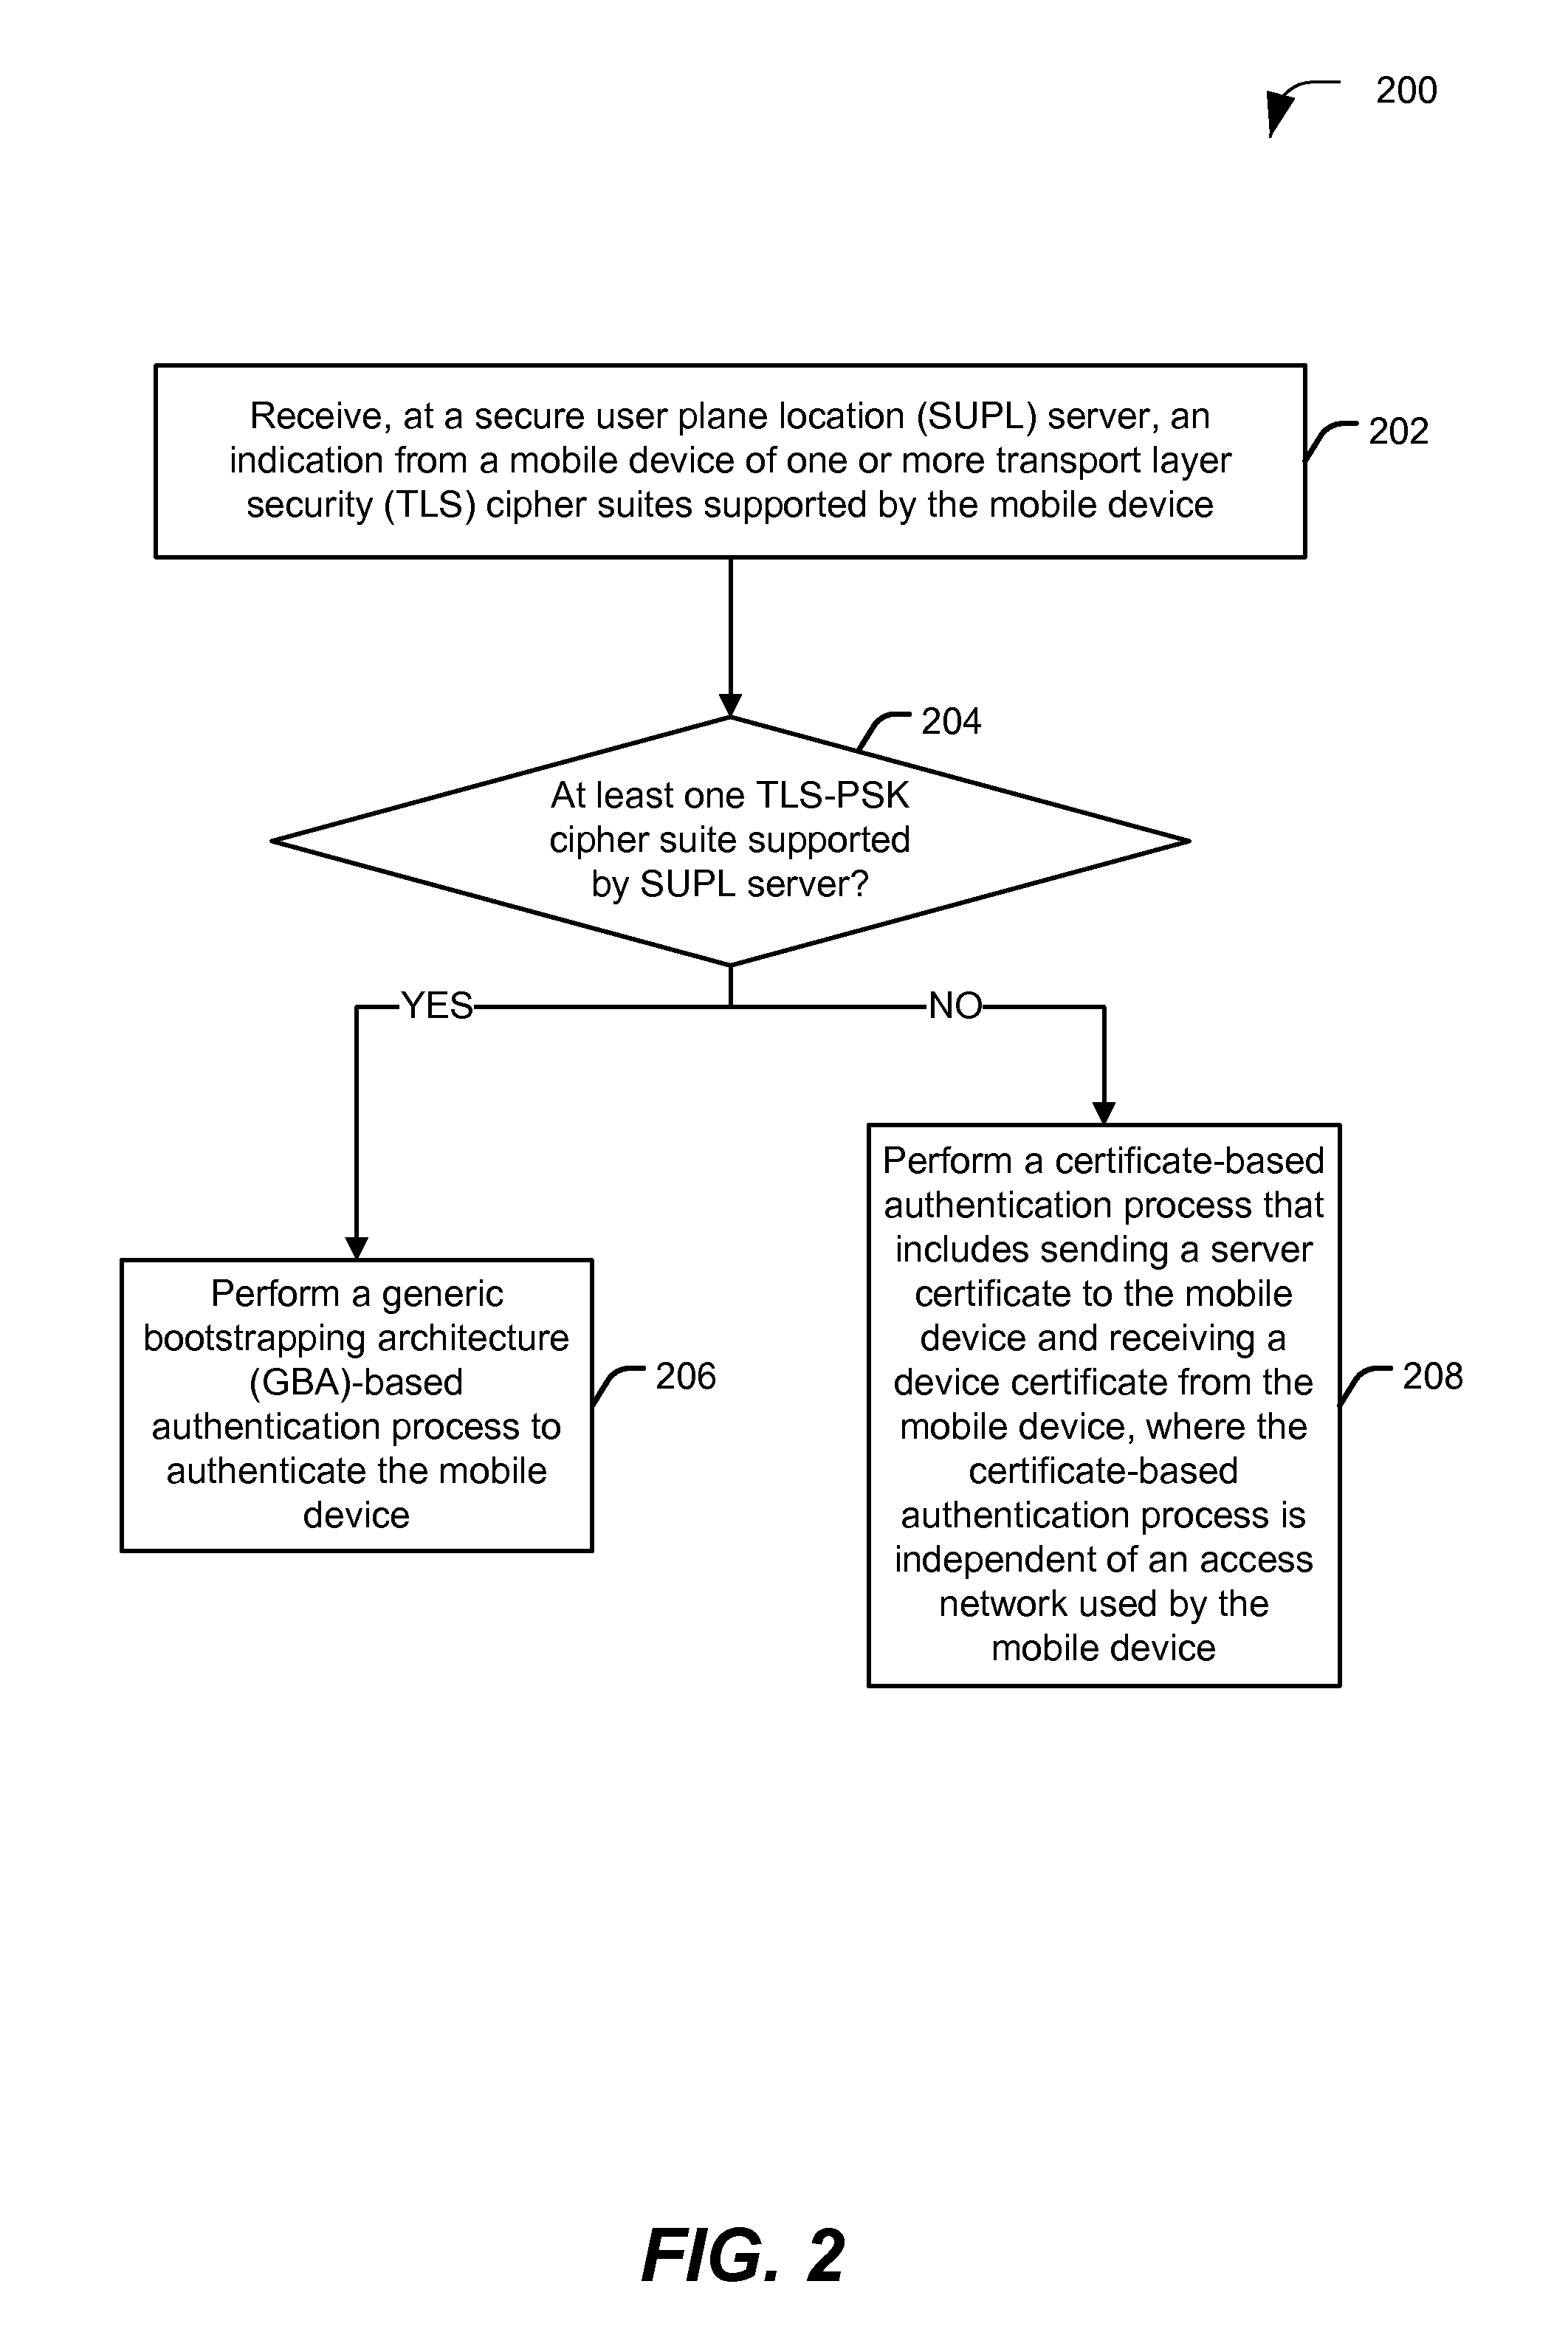 Authentication in secure user plane location (SUPL) systems